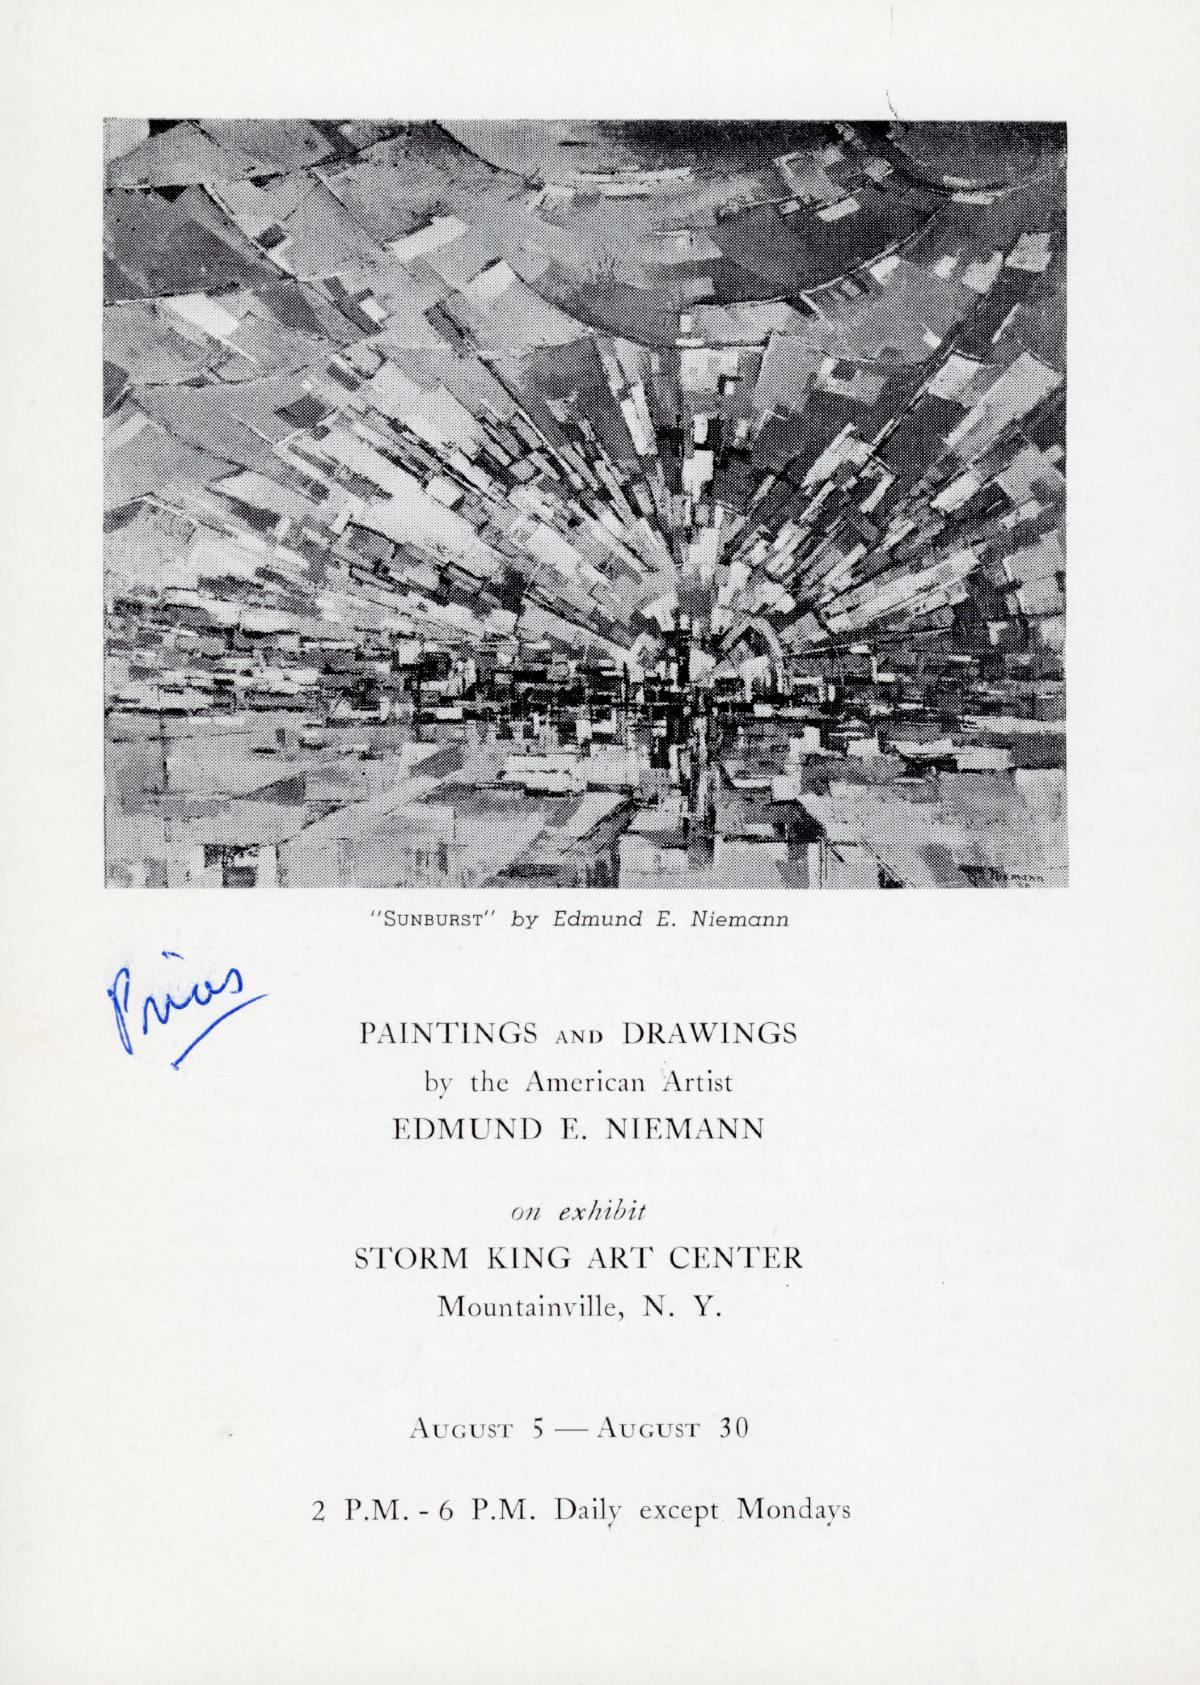 Paintings and Drawings by the American Artists Edmund E. Niemann, August 5-30, 1962, catalogue cover